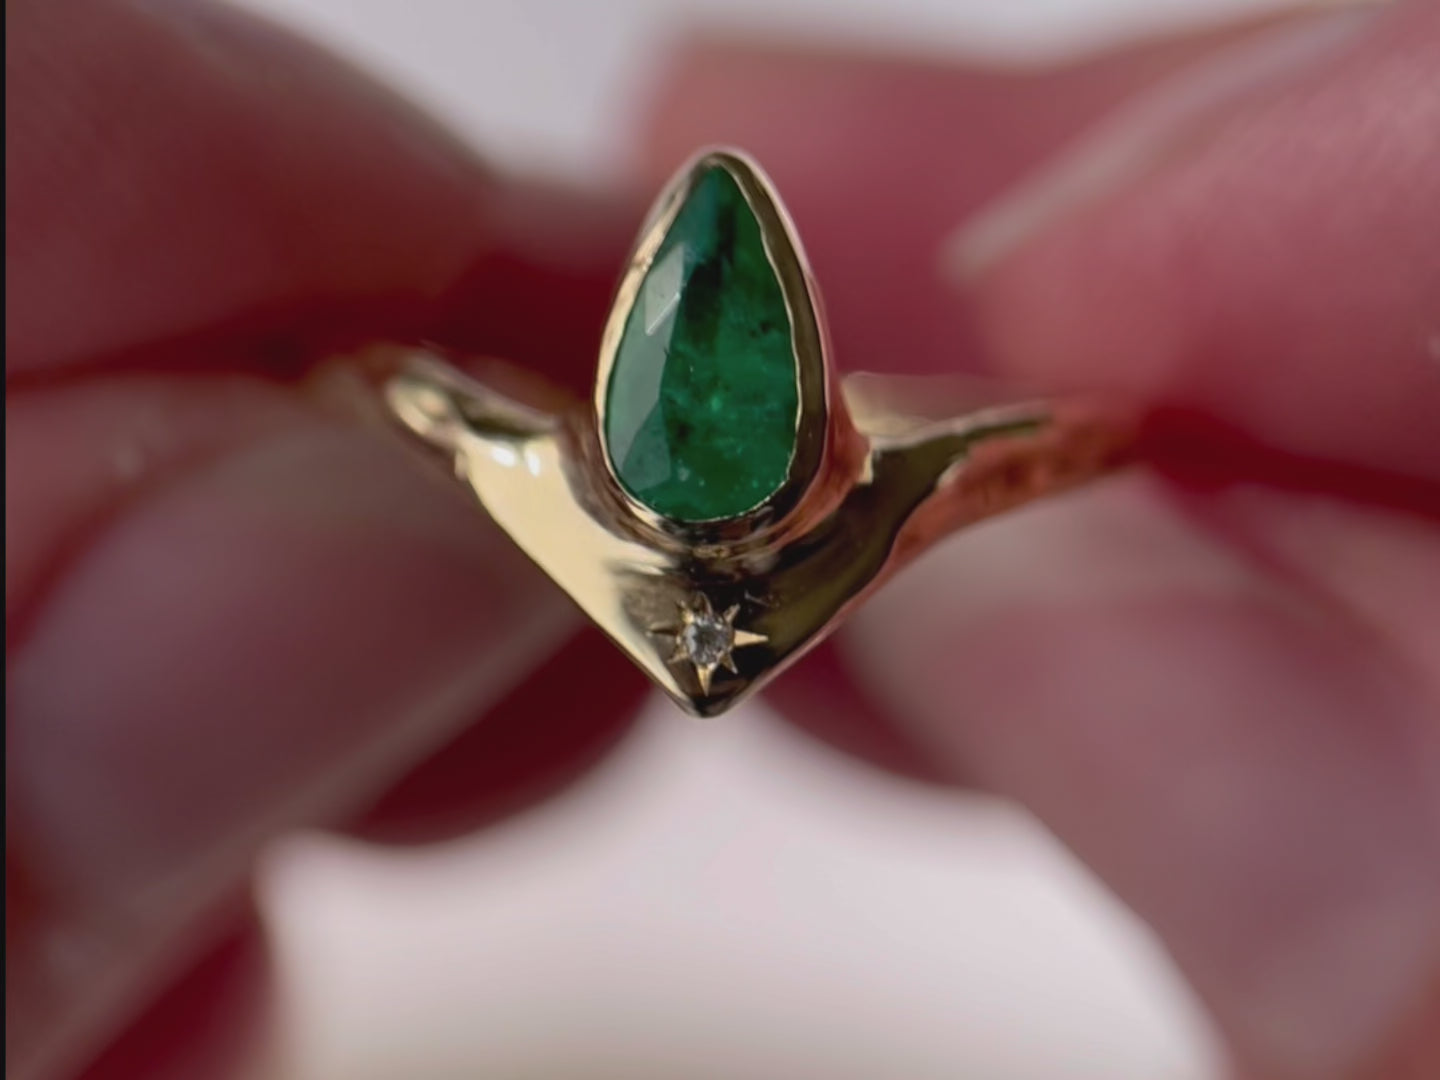 A close up video of a pear-shaped emerald bezel-set with a brilliant diamond star at its base, creating a striking and celestial-inspired jewelry piece.